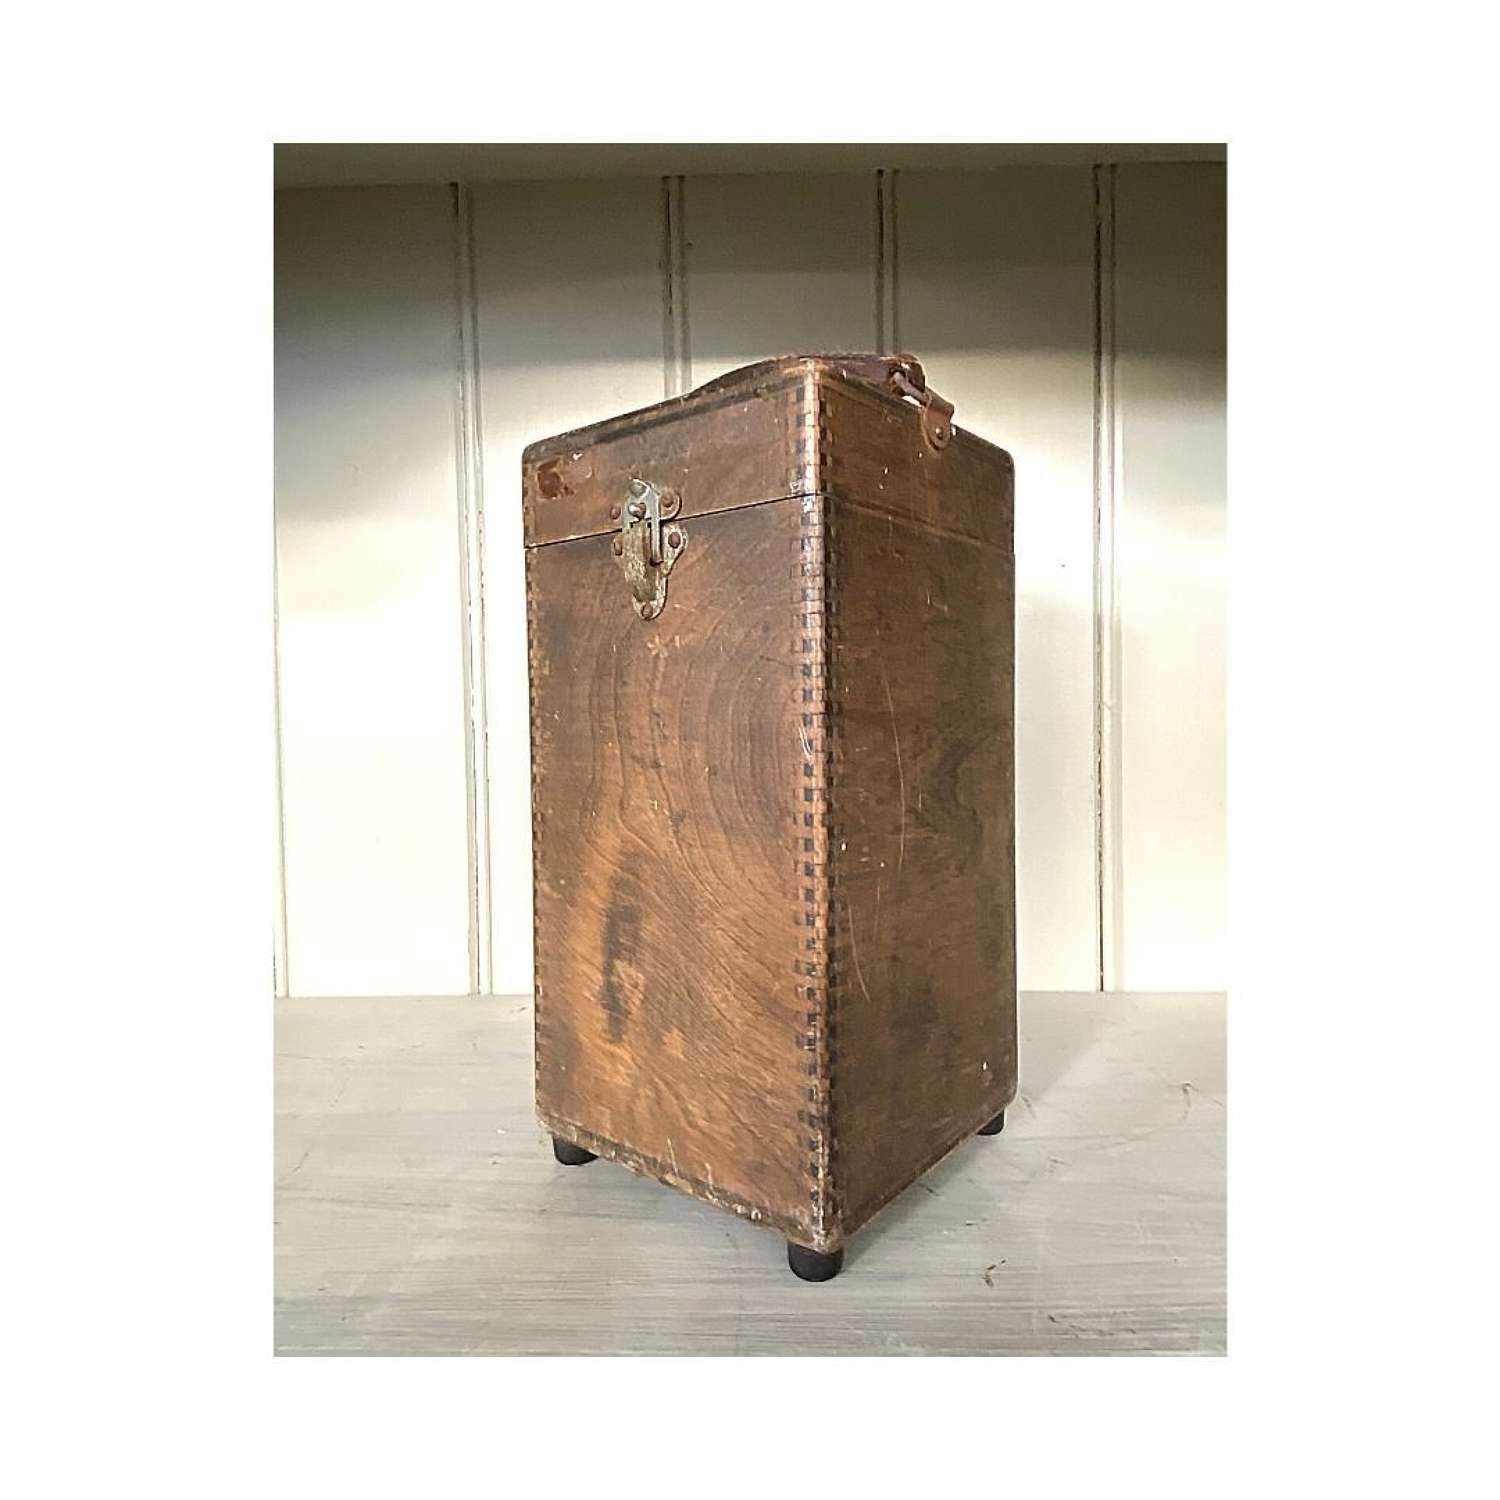 Vintage wooden box with leather carry handle